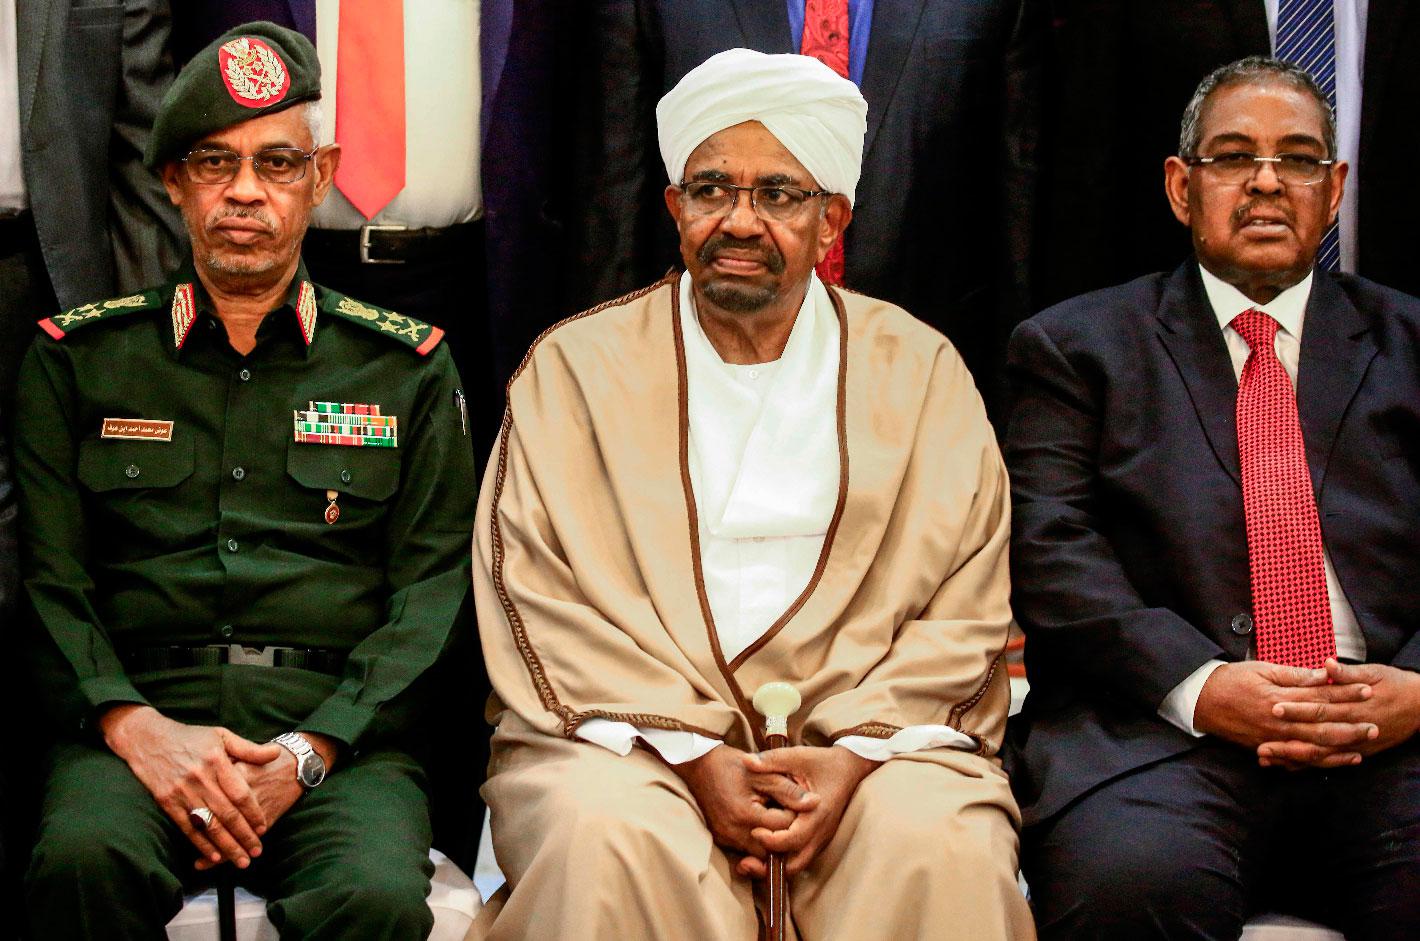 Sudan's President Omar al-Bashir (C) is seated alongside his first vice president Lieutenant General Awad Mohamed Ahmed ibn Auf (L) and Prime Minister Mohamed Tahir Eila (R) as they pose for a group photo with members of the new 20-member cabinet taking oath at the presidential palace in the capital on March 14, 2019.